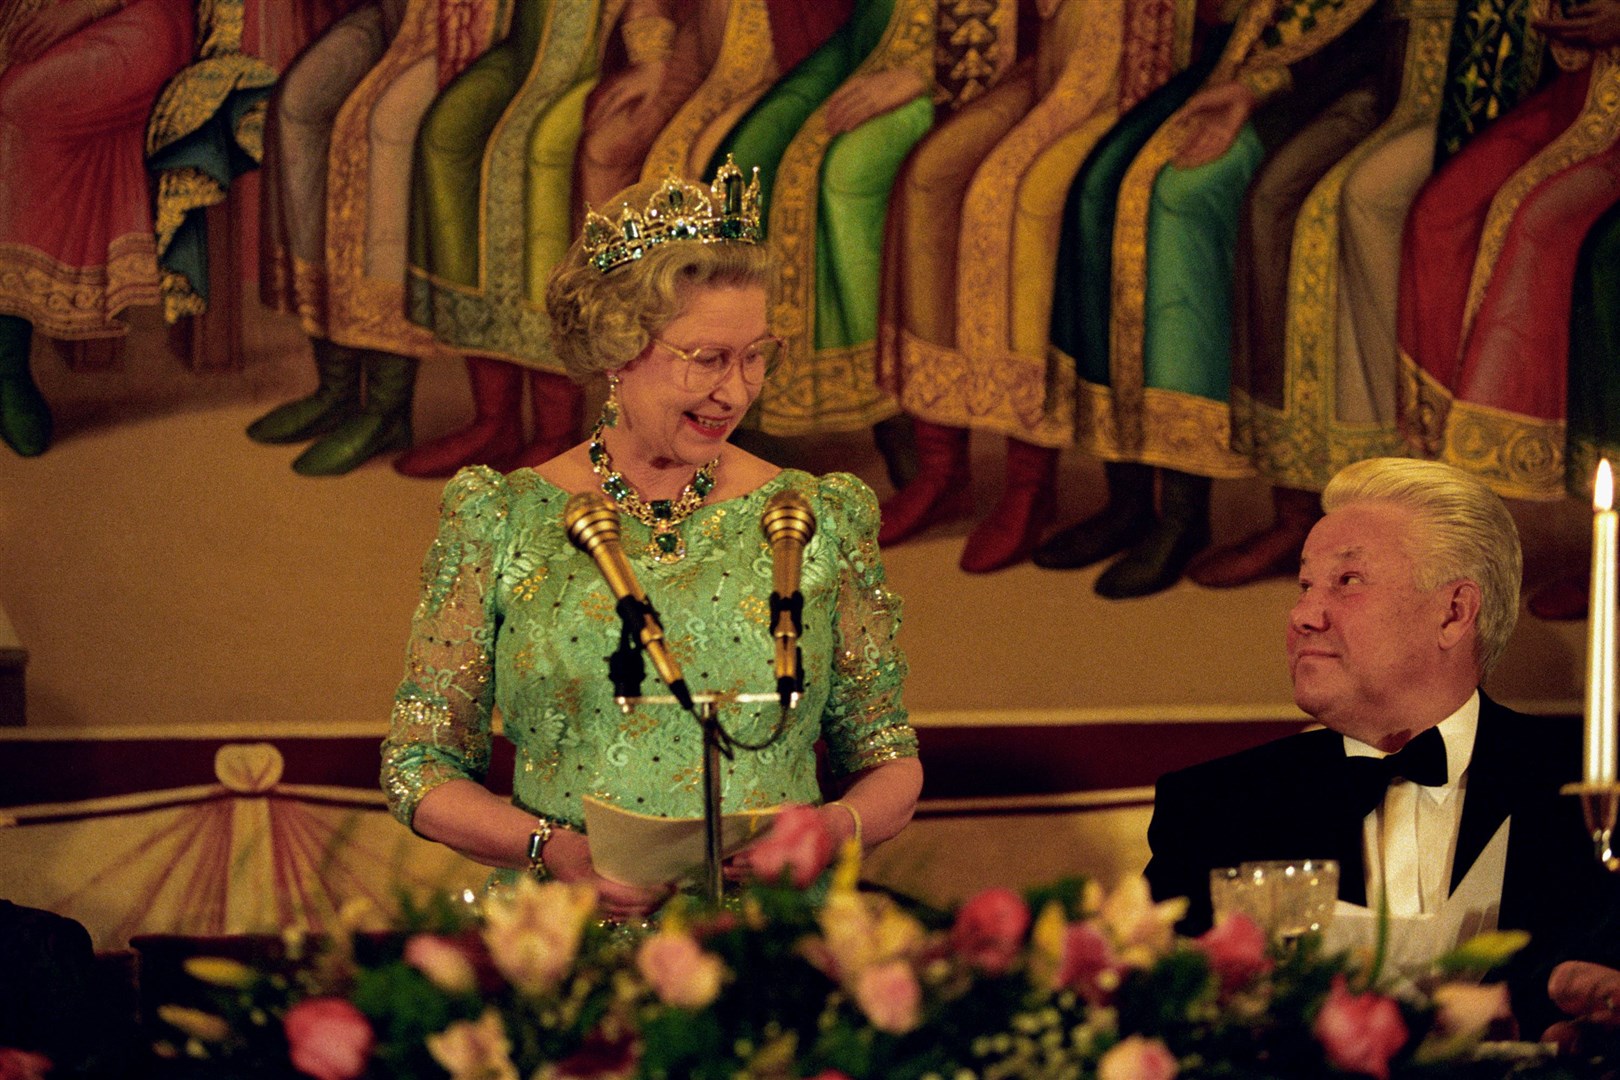 The Queen and Boris Yeltsin exchange a smile as the Queen makes a speech during a state banquet held in her honour at the Kremlin’s Faceted Hall in 1994 (Martin Keene/PA)